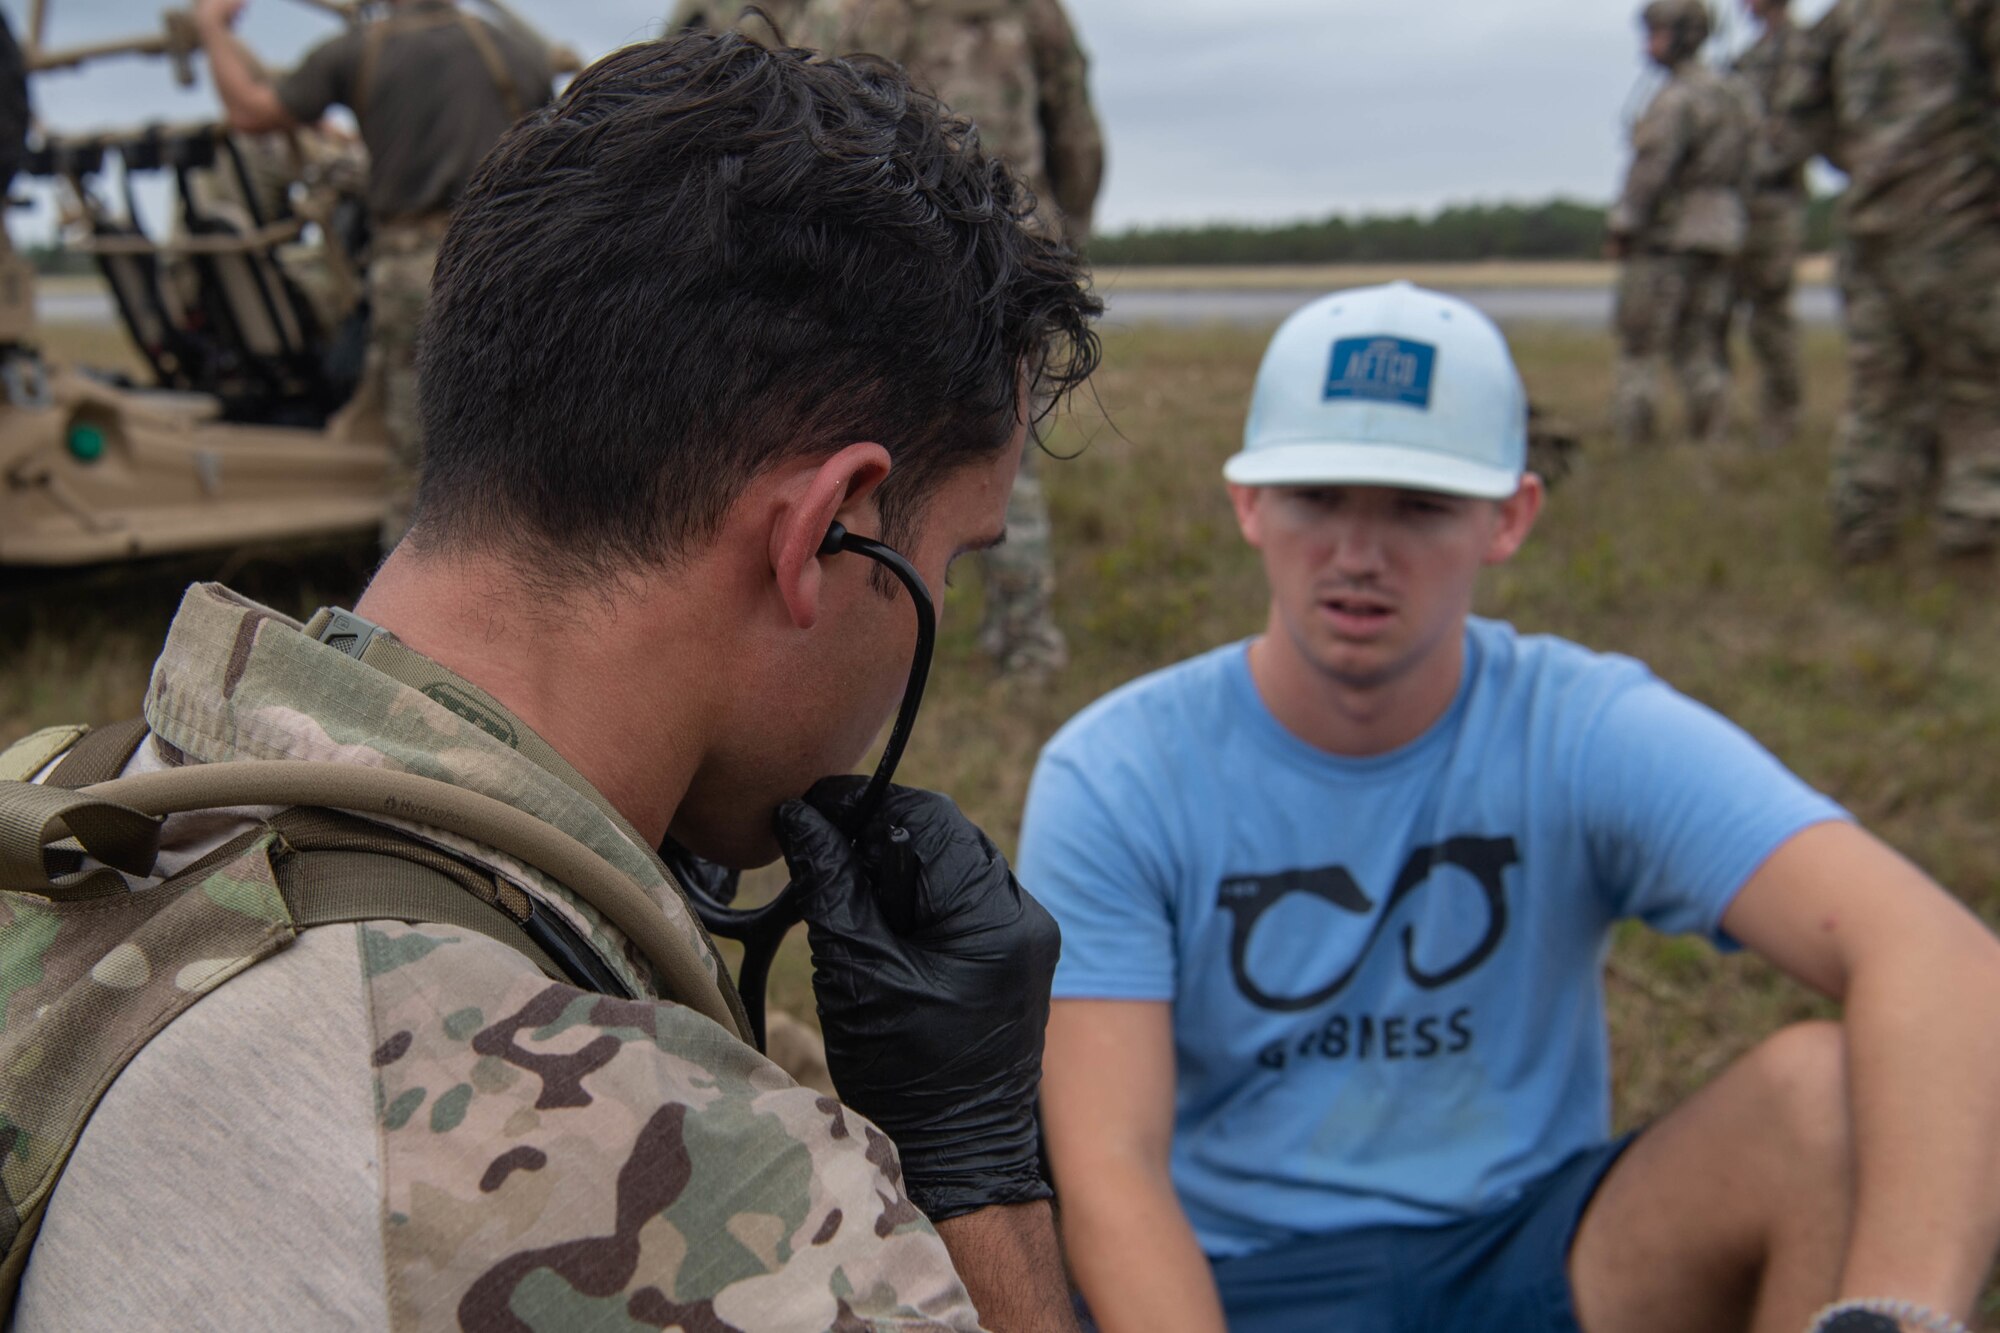 We look over the shoulder of a Special Tactics operator as he inserts a stethoscope into his ears so he can listen to a patient sitting on the ground to his right in a blue t-shirt and black shorts